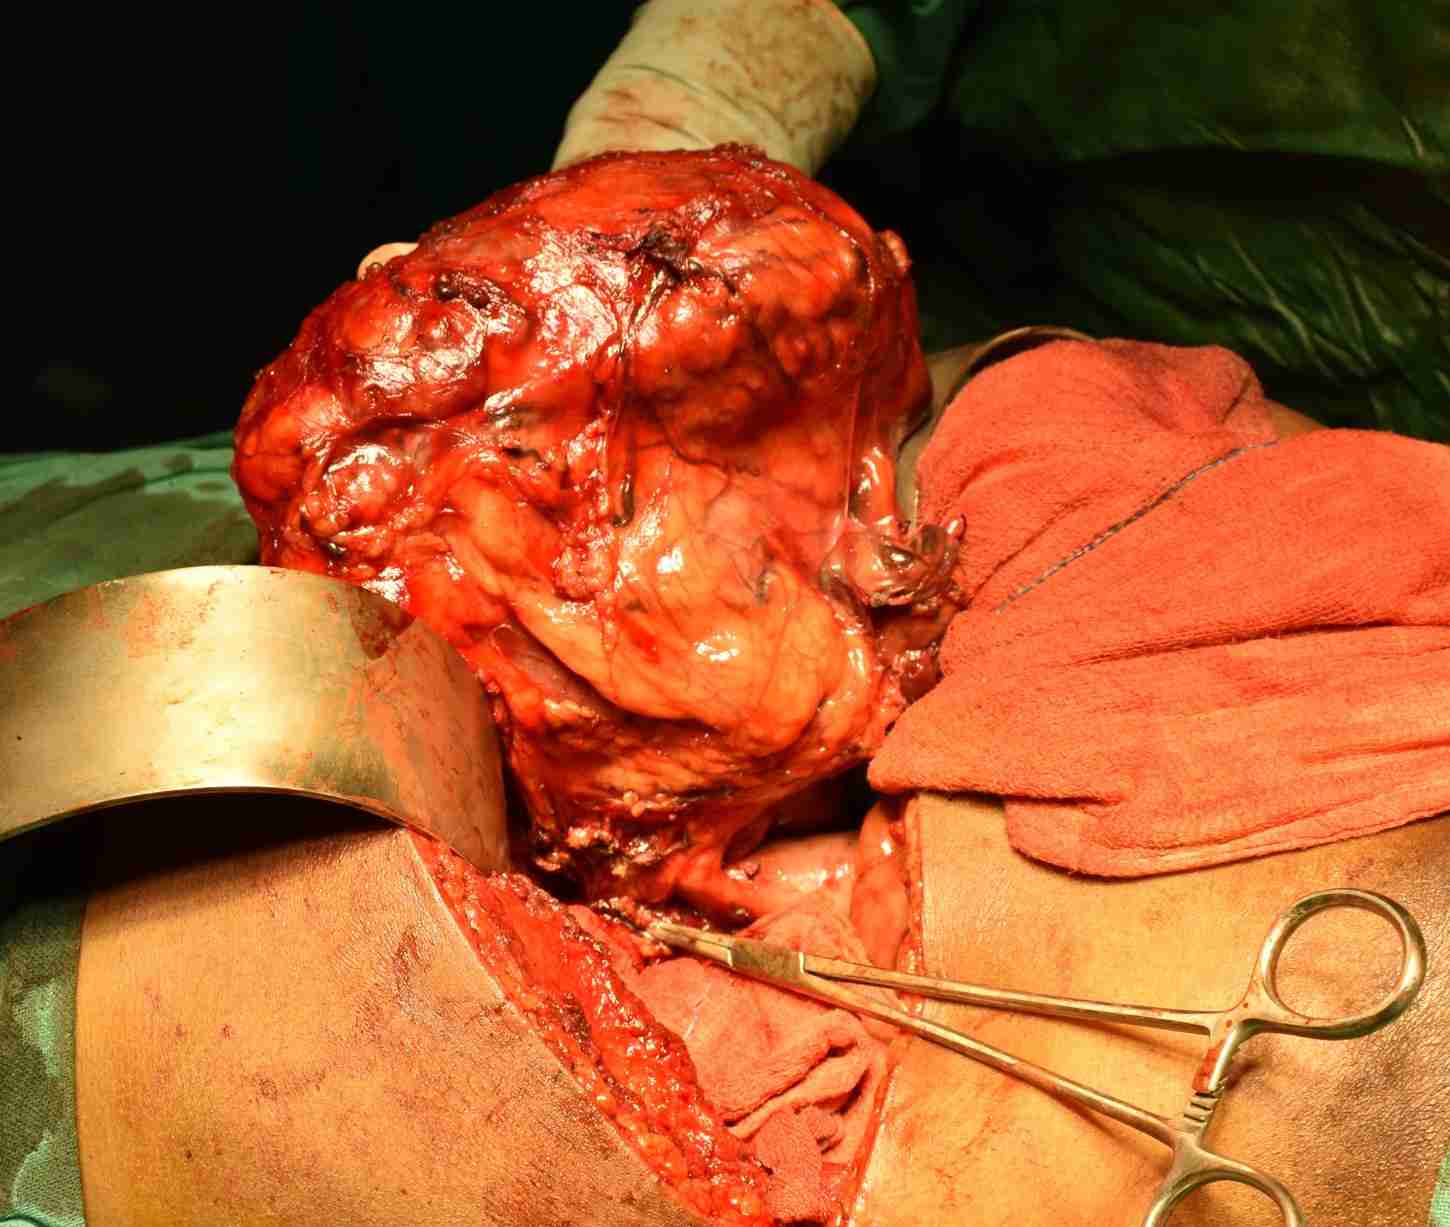 Kidney Cancer treated by Open Nephrectomy